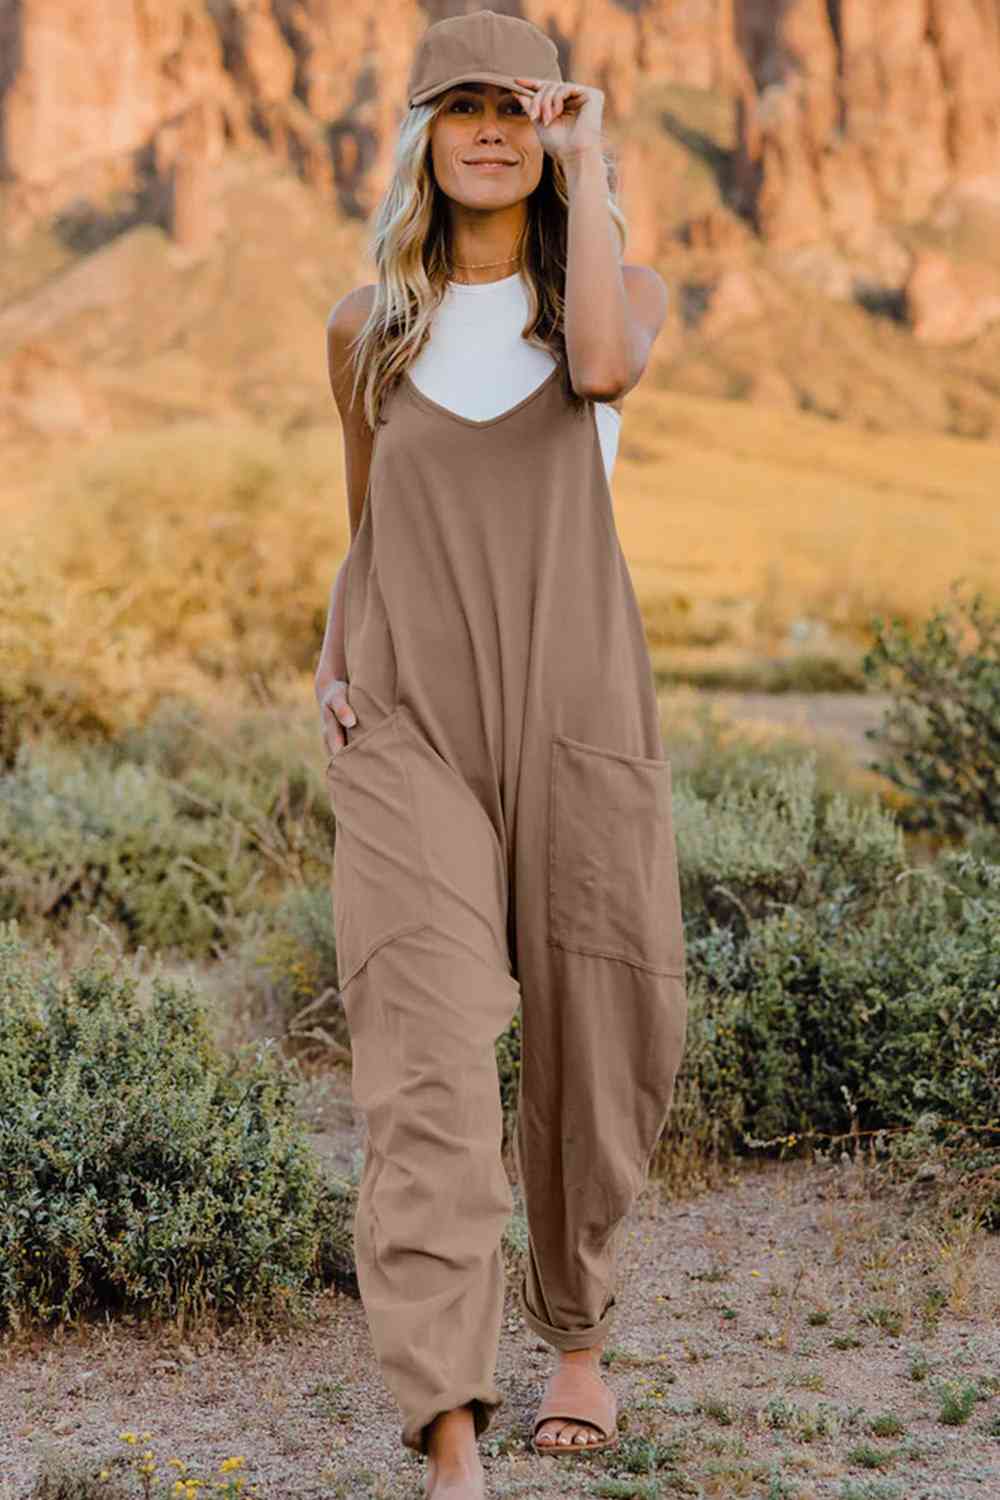 Double Take V-Neck Sleeveless Jumpsuit with Pocket Tan